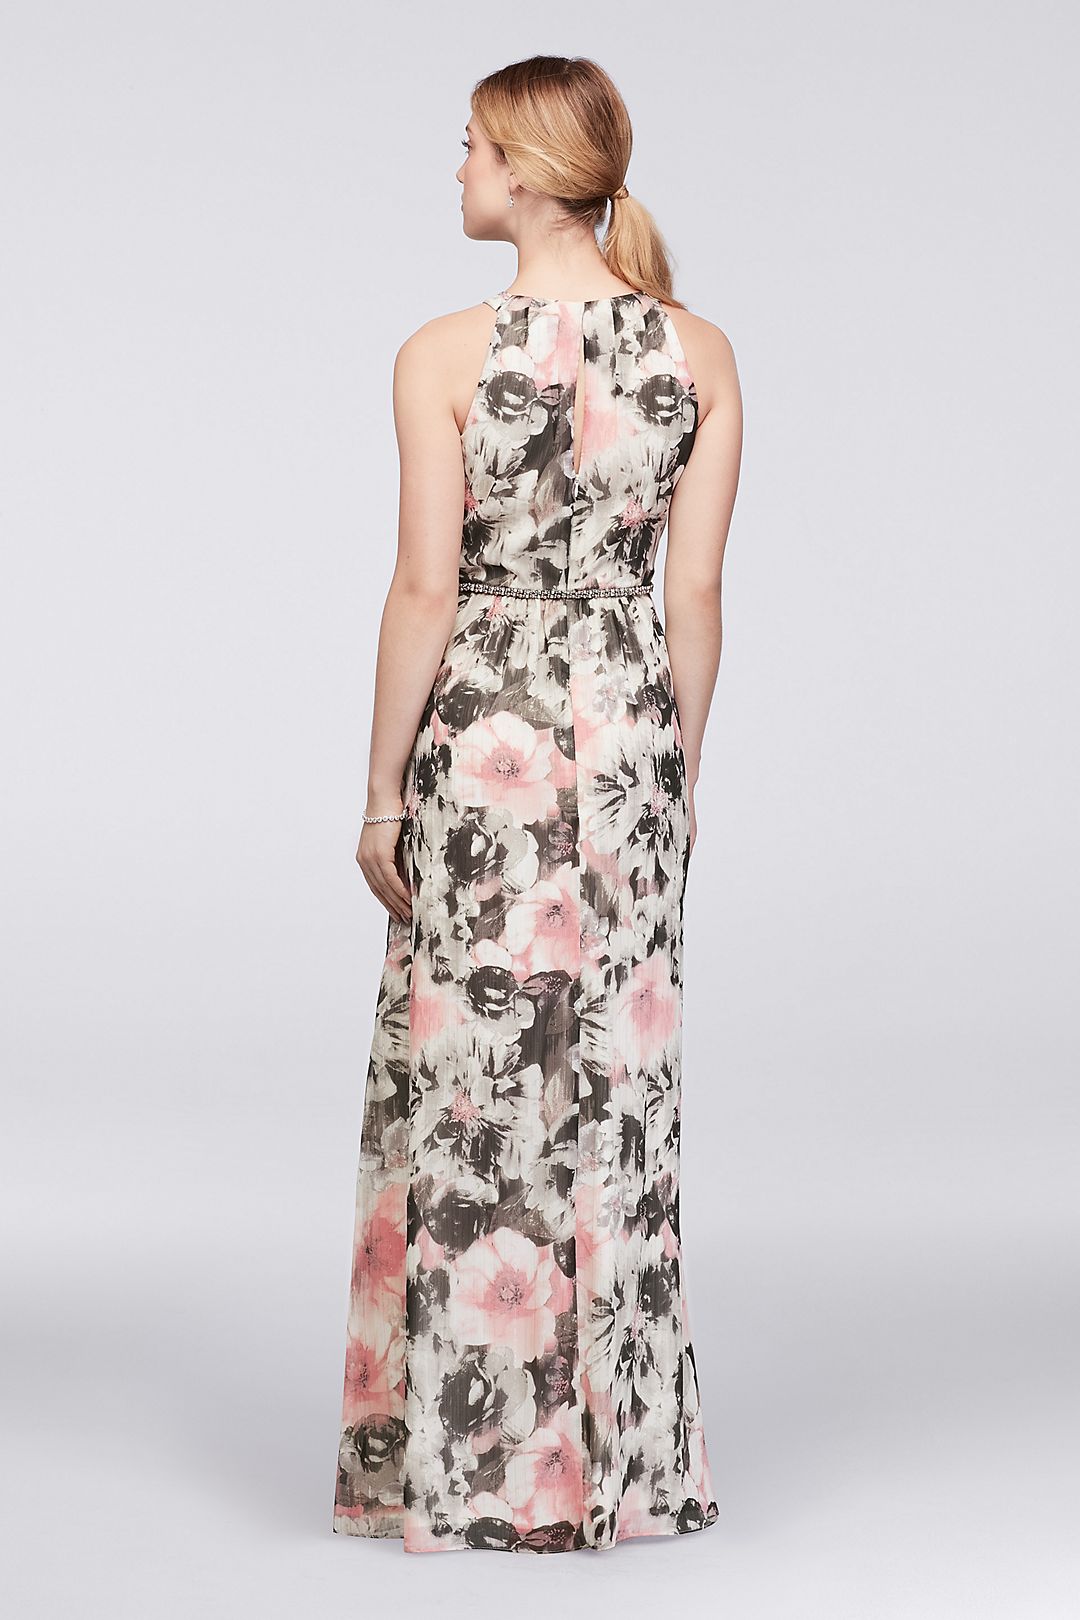 Floral Chiffon Halter Dress with Beaded Belt  Image 4